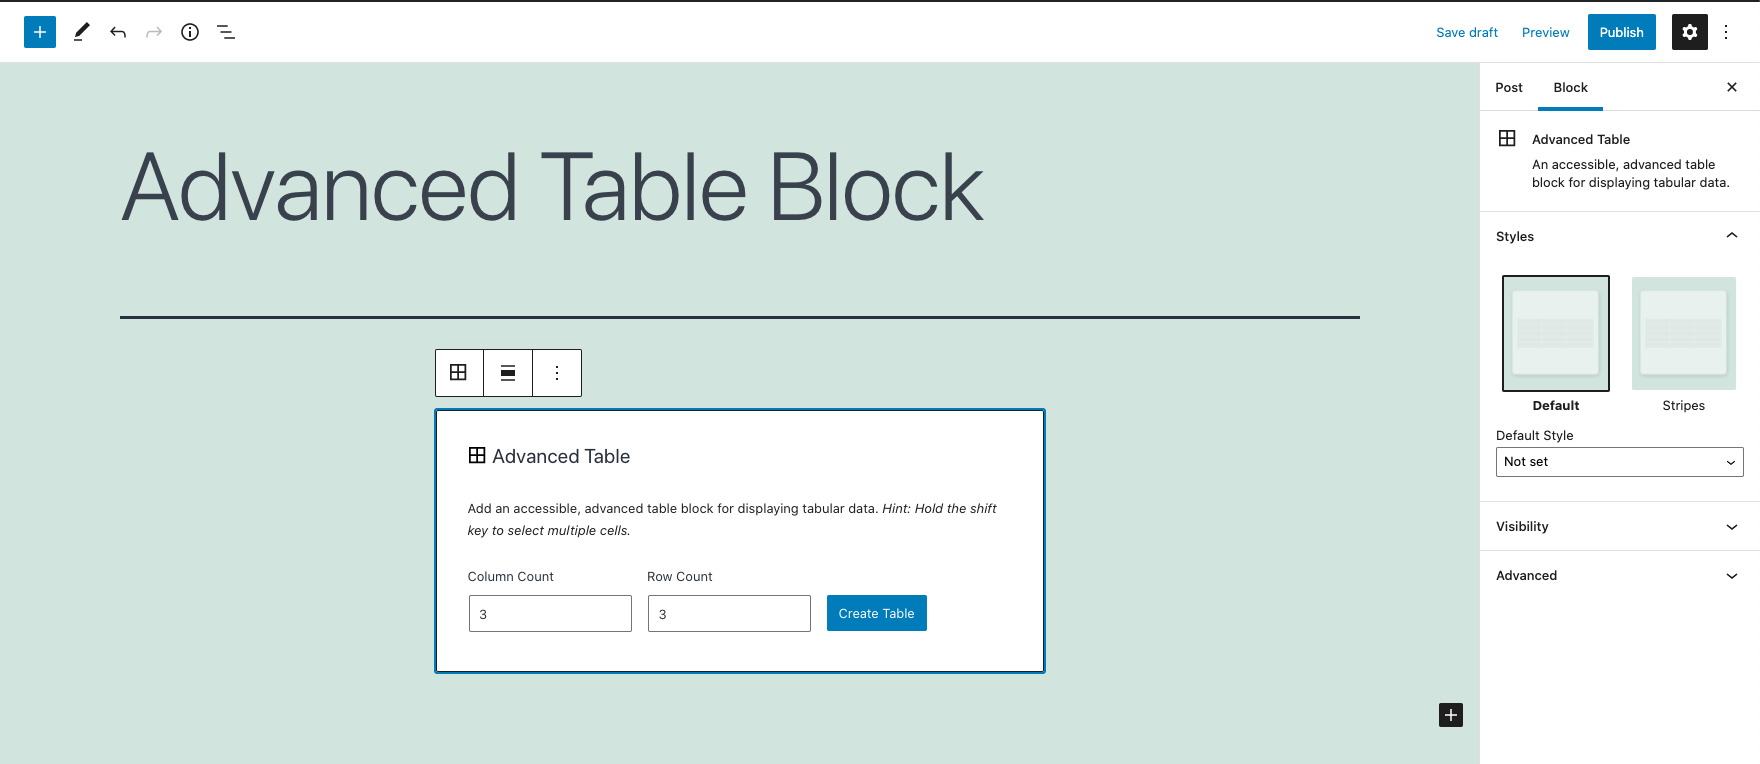 Screenshot showing the advanced table block setup screen allowing a user to choose the number of columns and rows for the table